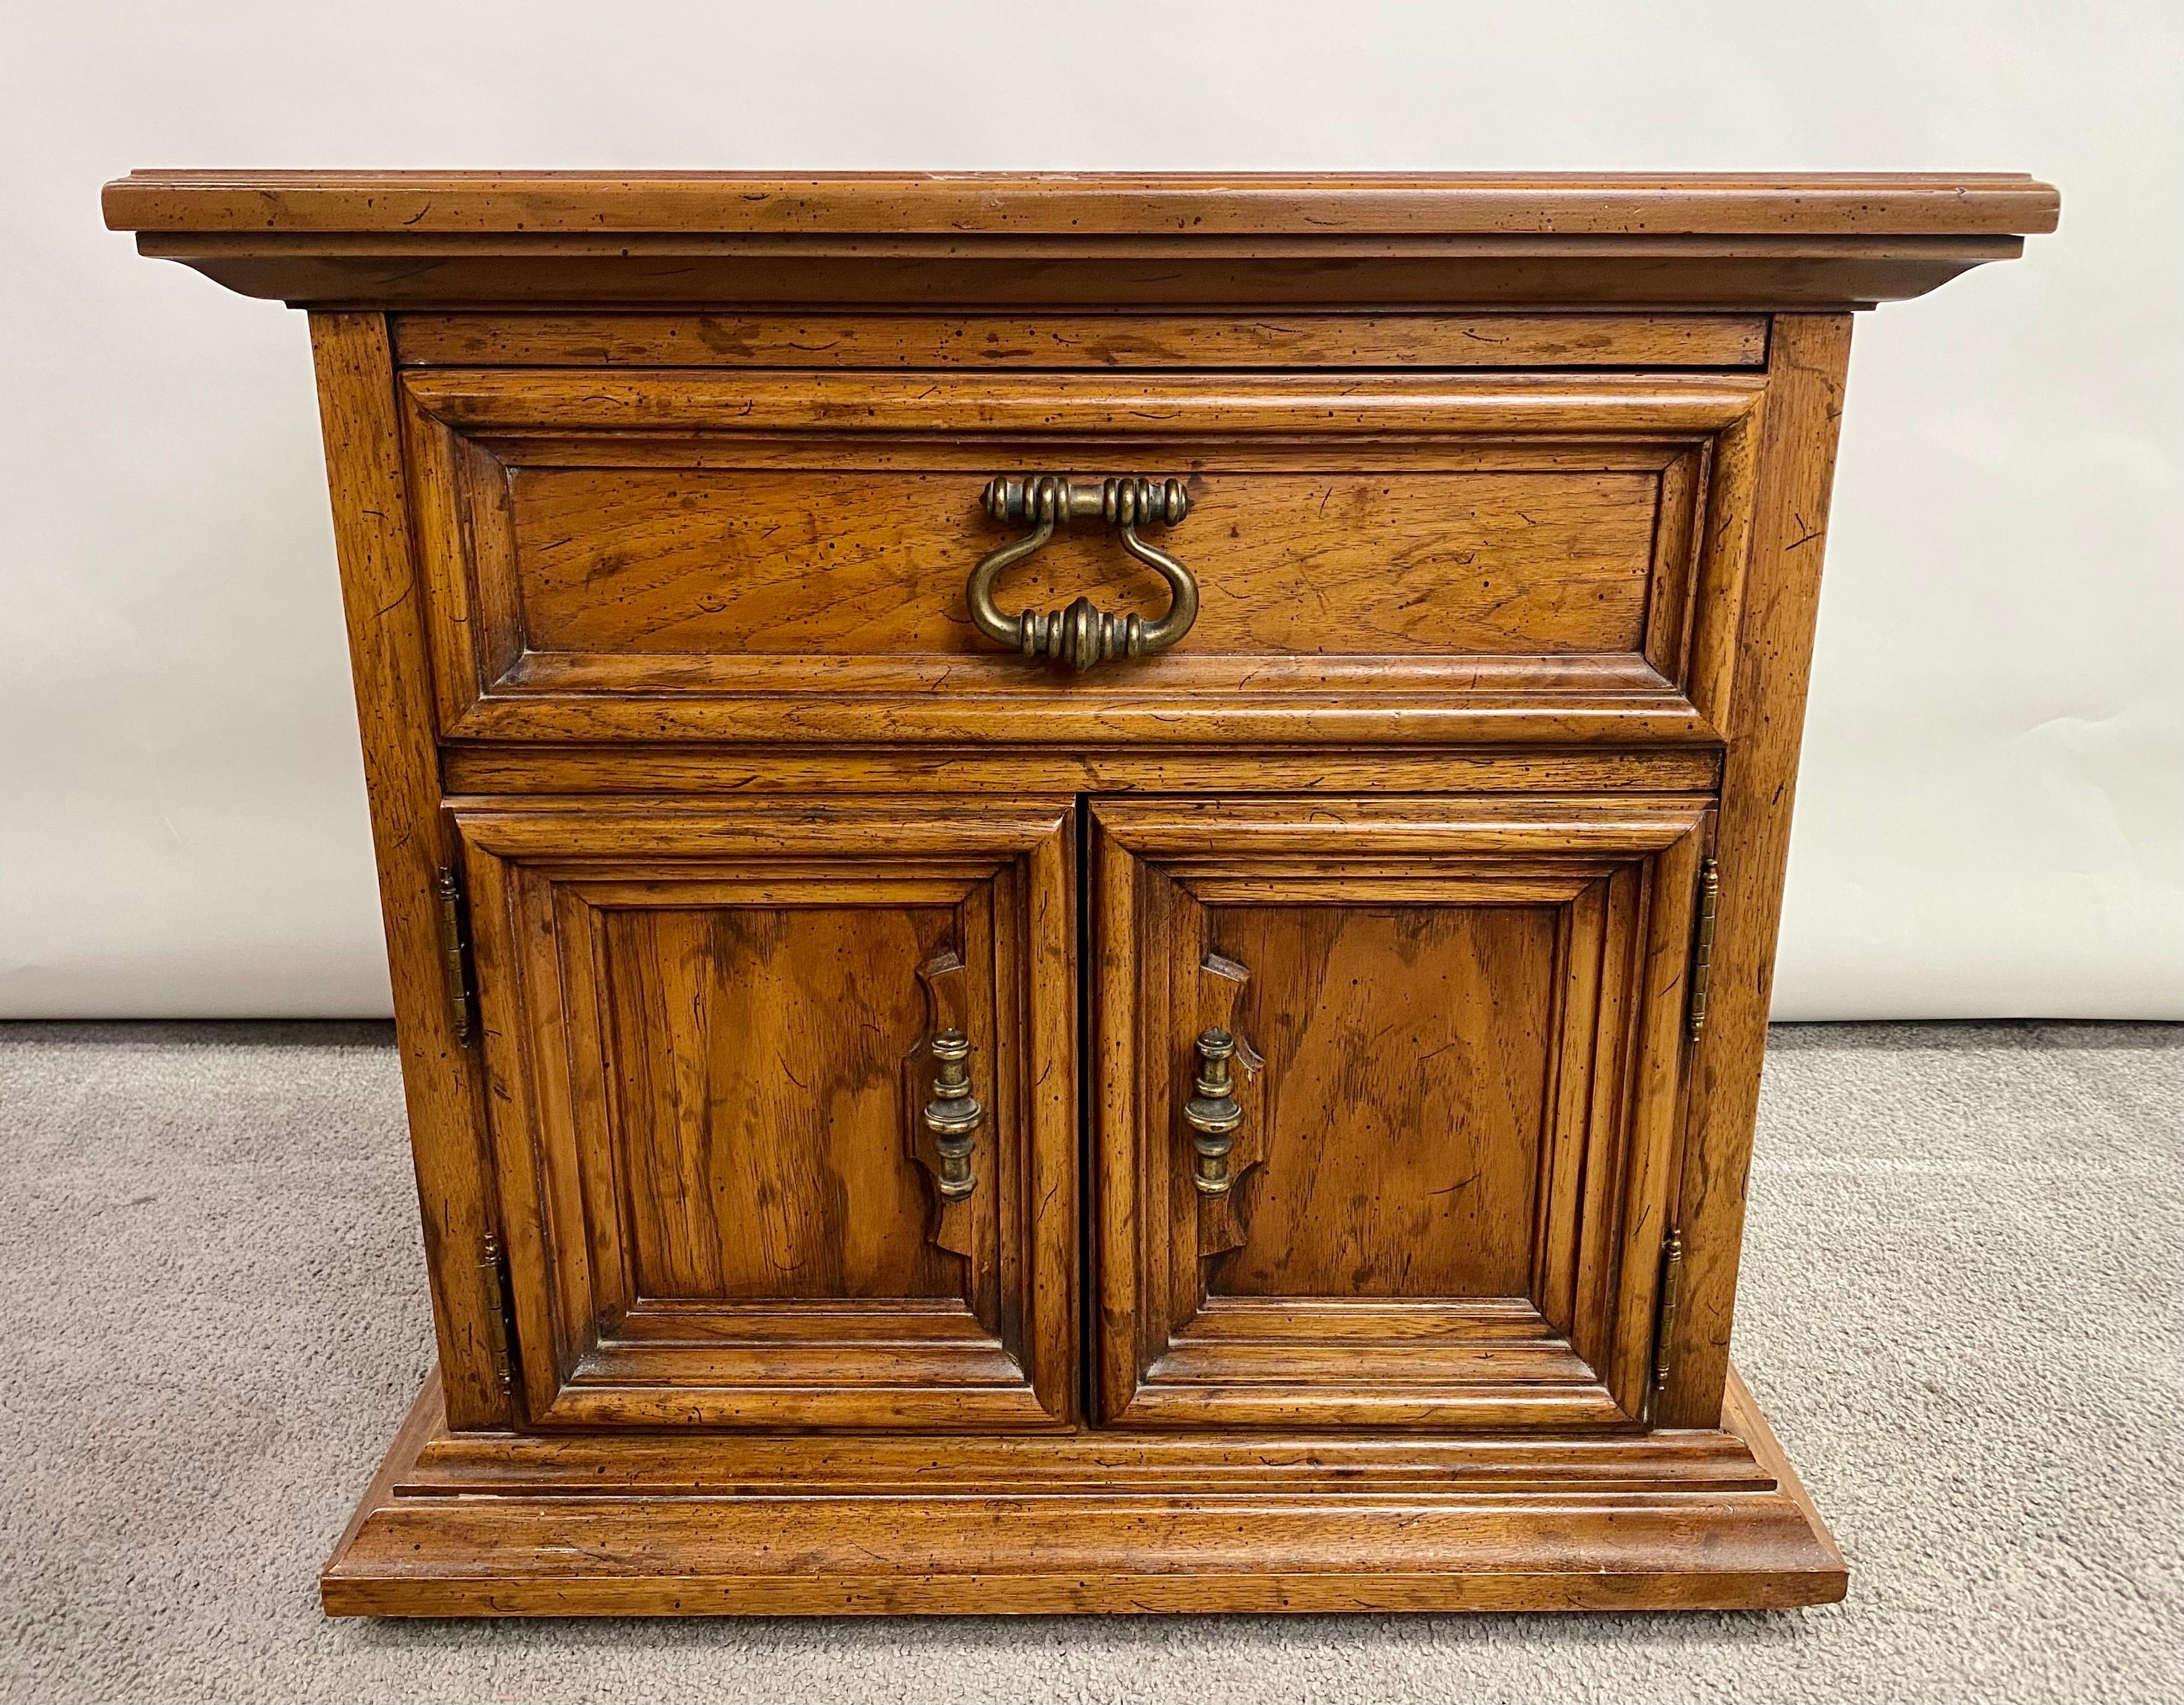 A high quality pair of nightstands by Dexel Heritage in campaign style. The Mid-Century pair of nightstands or end -tables are finely crafted of Pecan wood showing very nice wood grain. The nightstands feature a two door cabinet and one drawer for